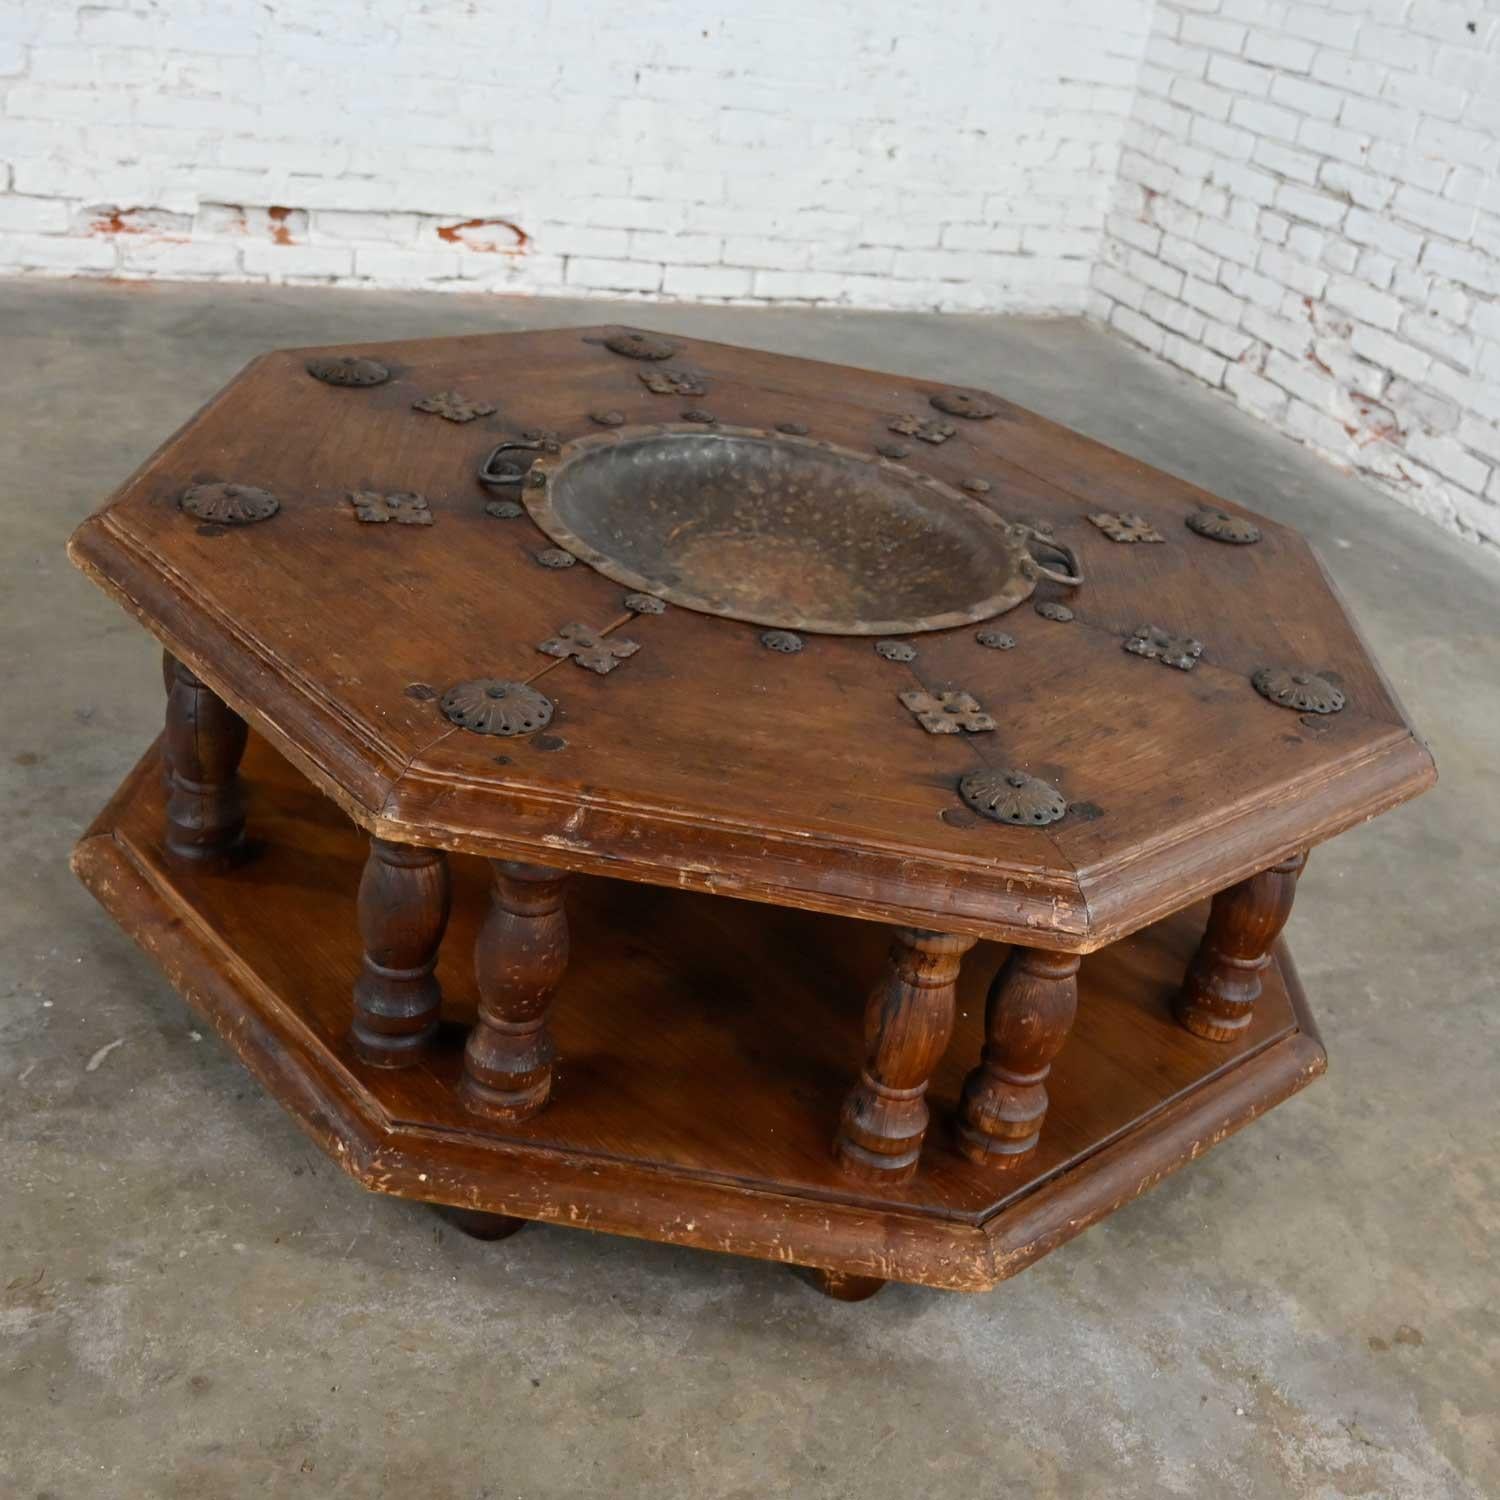 Spanish Colonial Revival Rustic Octagon Brazier Coffee Table Style Artes De Mexi 8